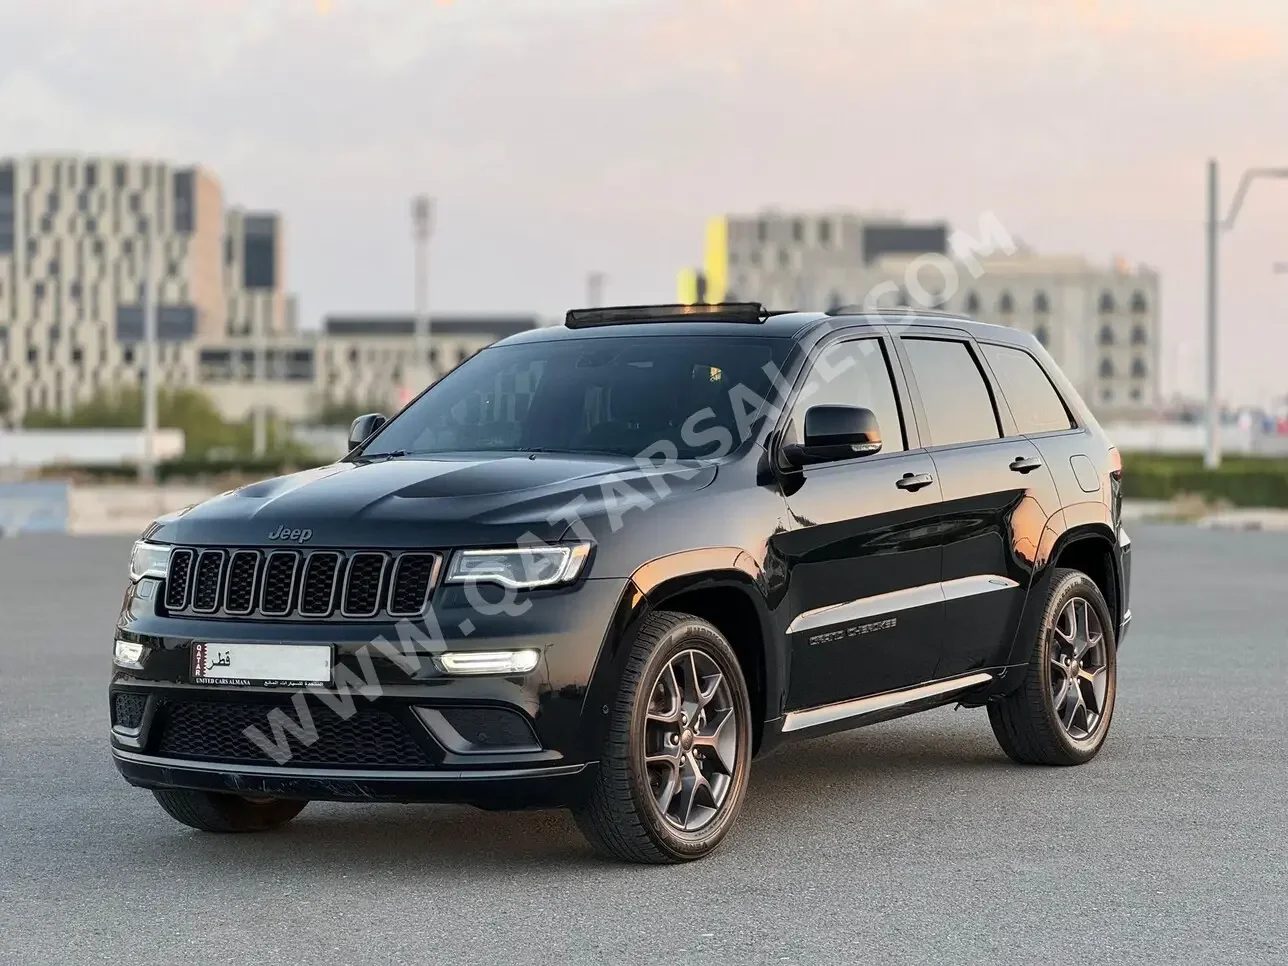 Jeep  Grand Cherokee  Limited  2020  Automatic  89,000 Km  6 Cylinder  Four Wheel Drive (4WD)  SUV  Black  With Warranty